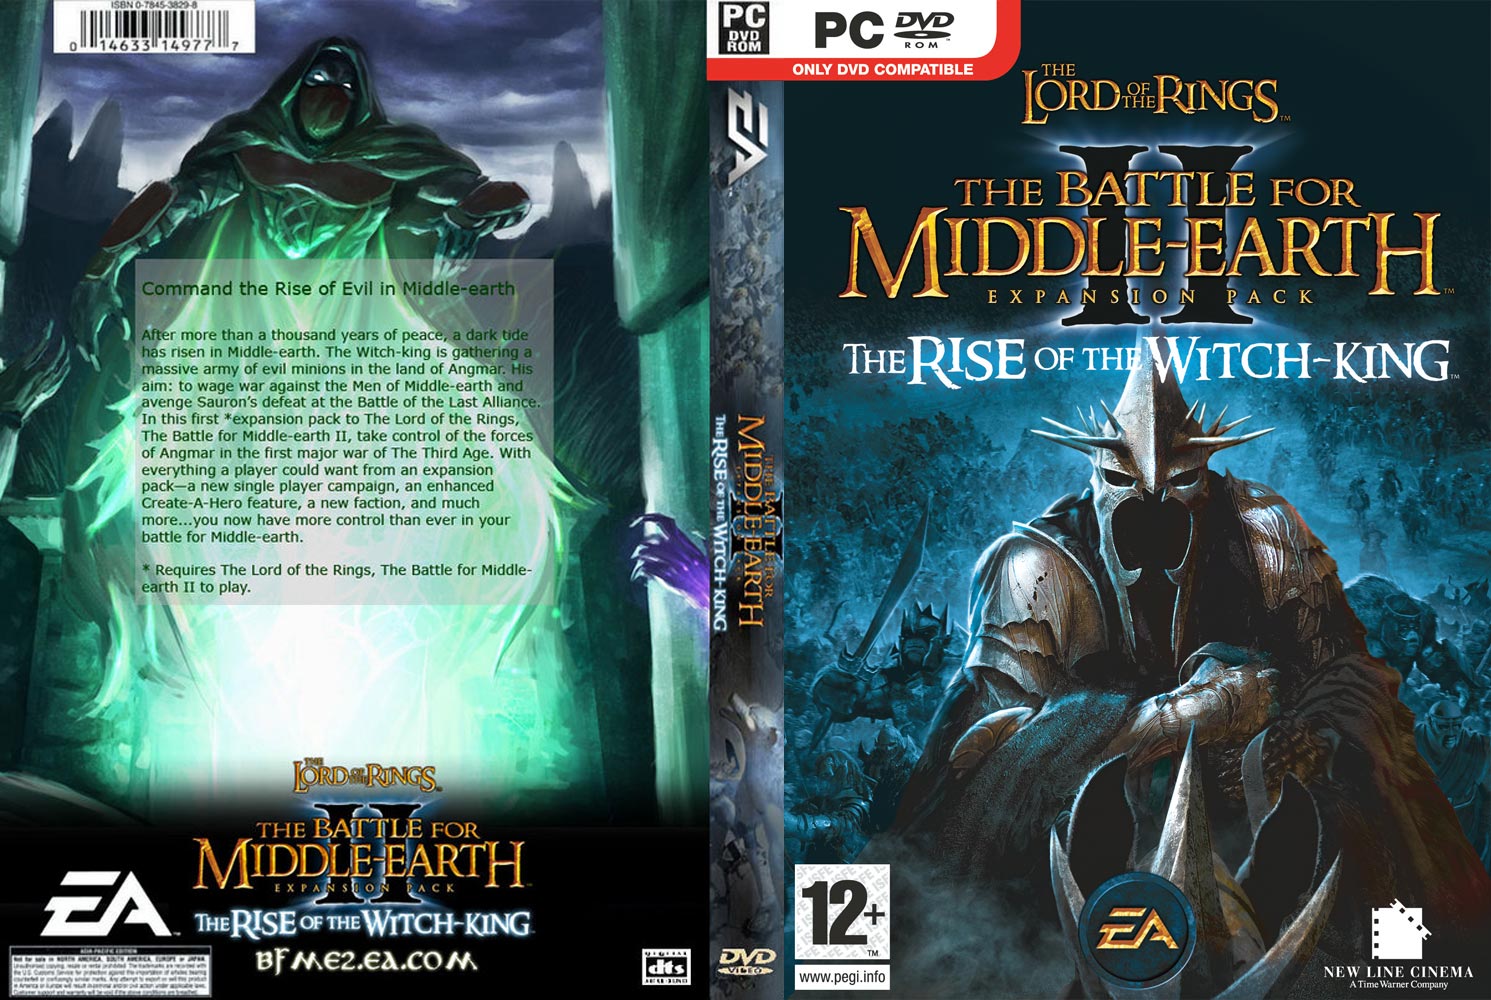 Battle for Middle-Earth 2: The Rise of the Witch-King - DVD obal